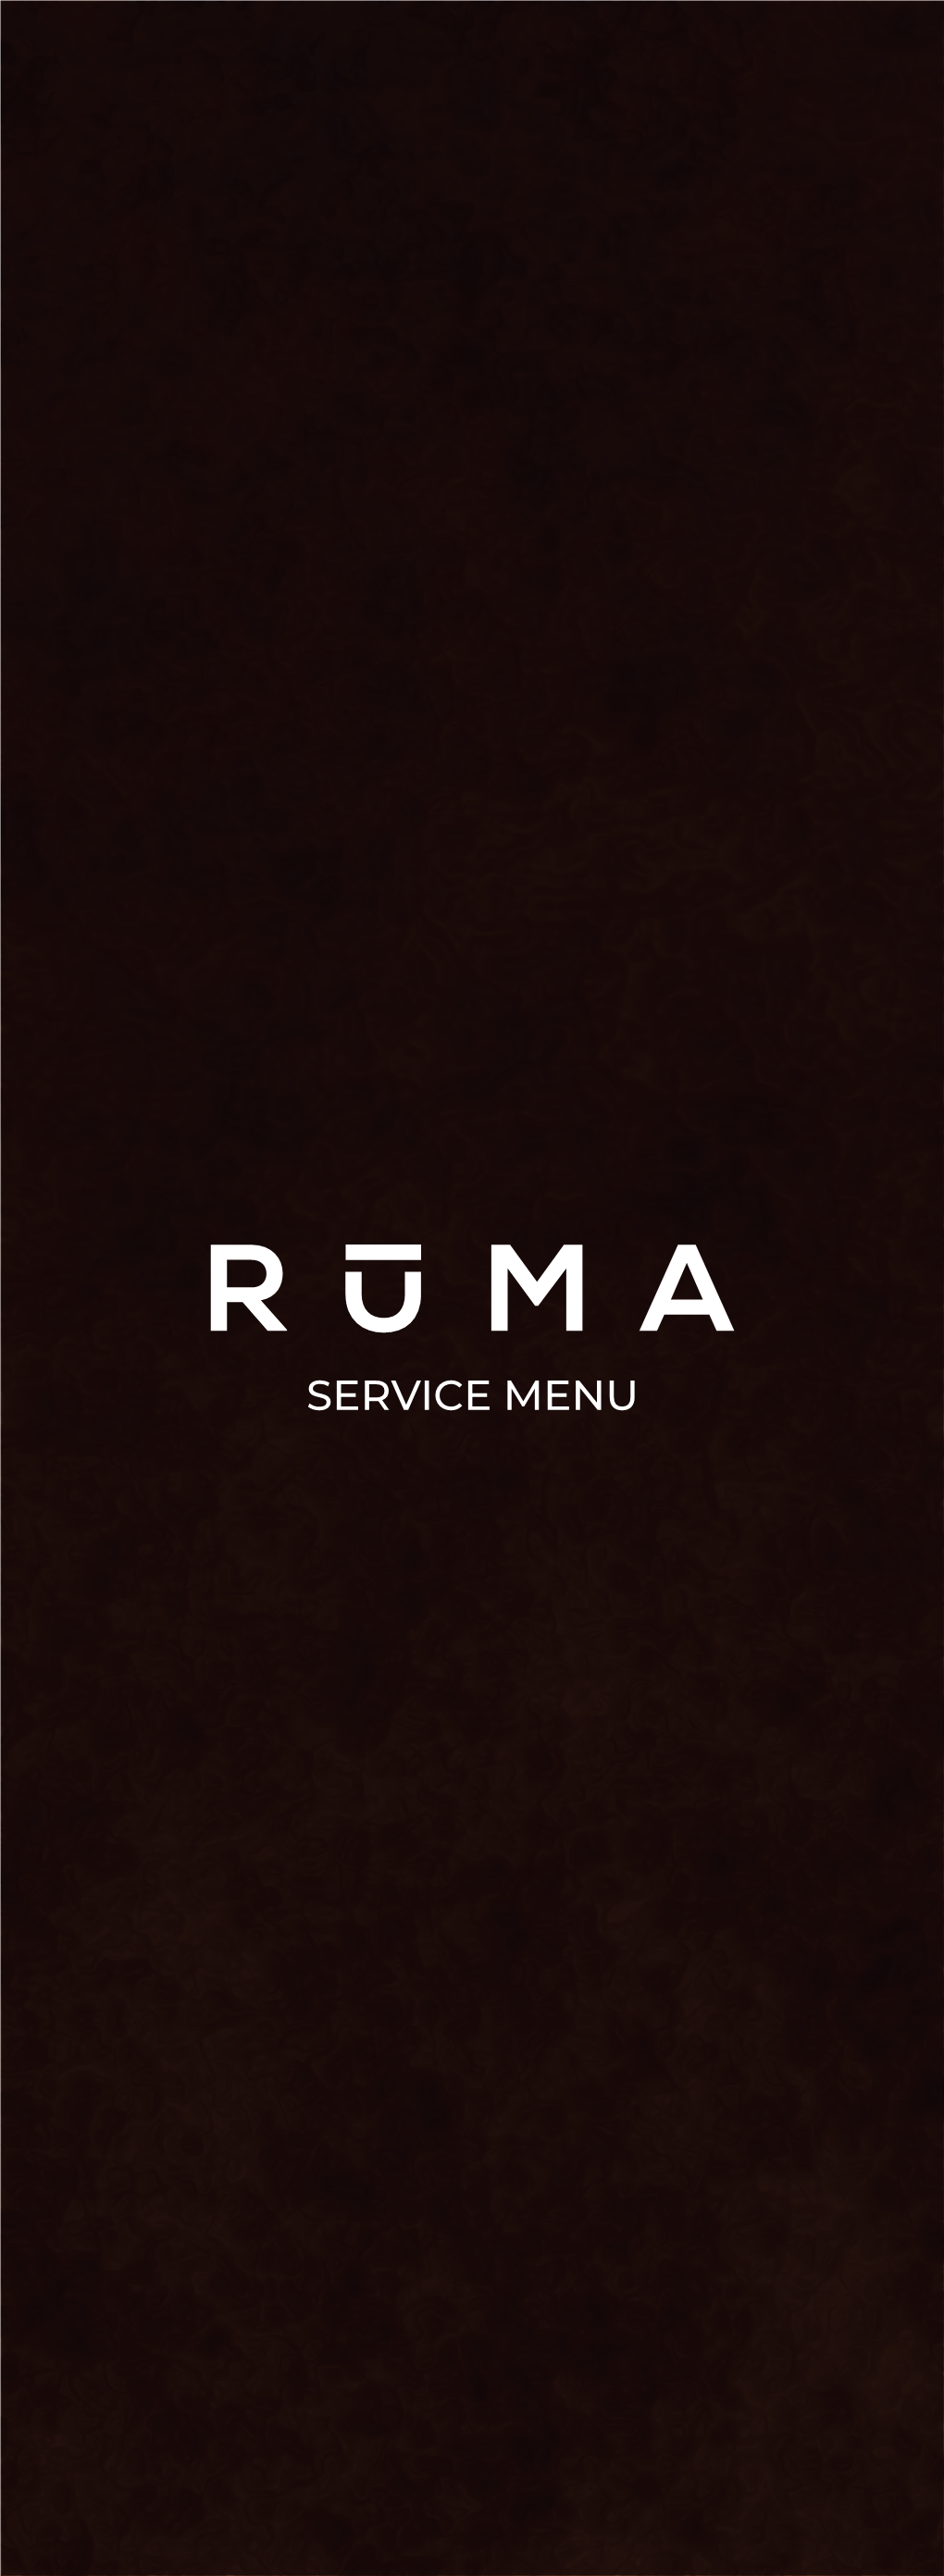 Service Menu at Ruma, Beauty Is Our Passion